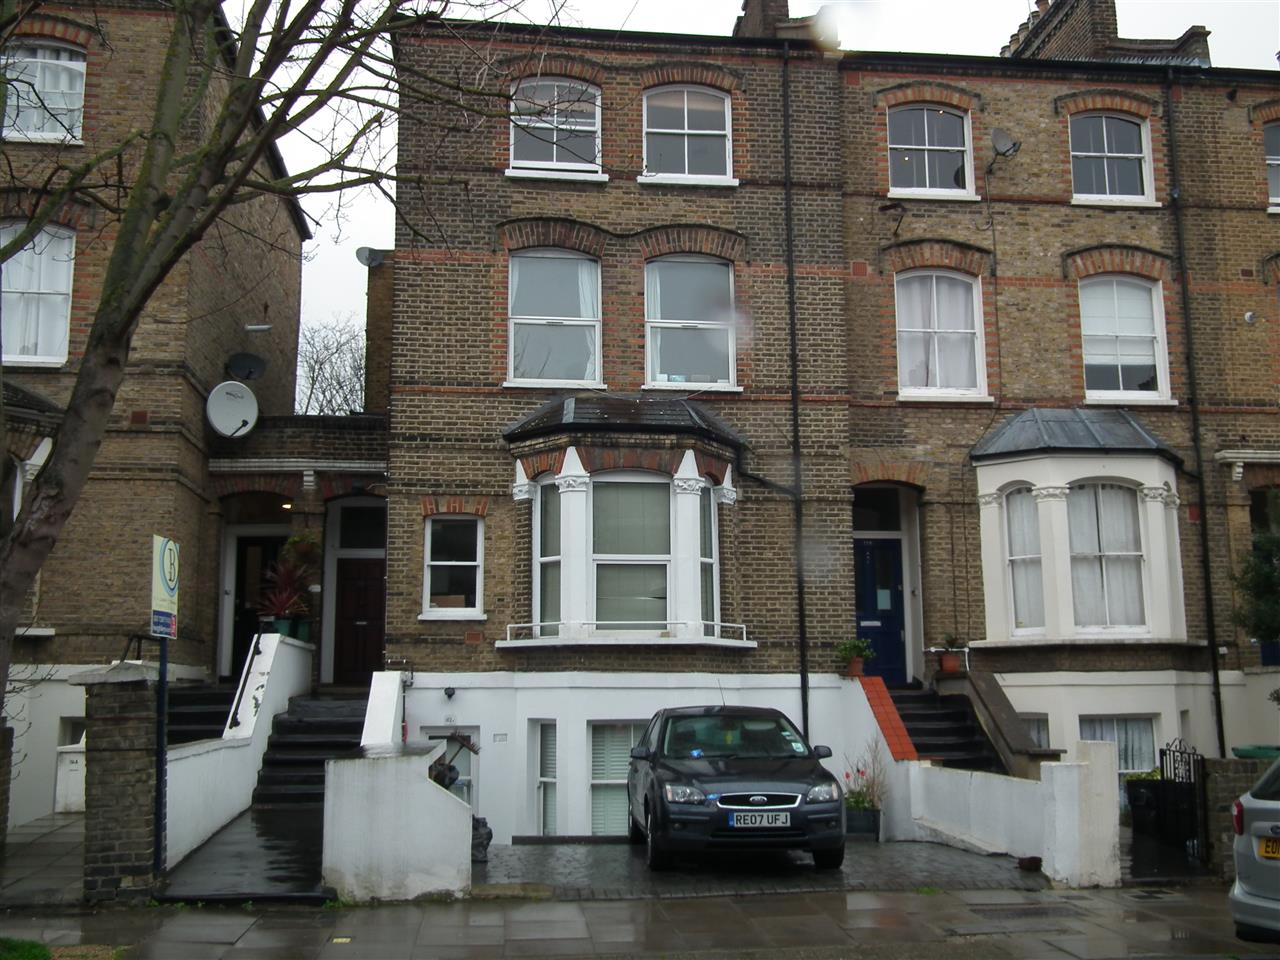 AVAILABLE 20TH JANUARY 2023. Located on the top floor of this converted house is this well presented and spacious apartment which is in the process of being fully decorated. The accommodation comprises of two double bedrooms, reception room with large elevated shelving/TV area, separate modern ...